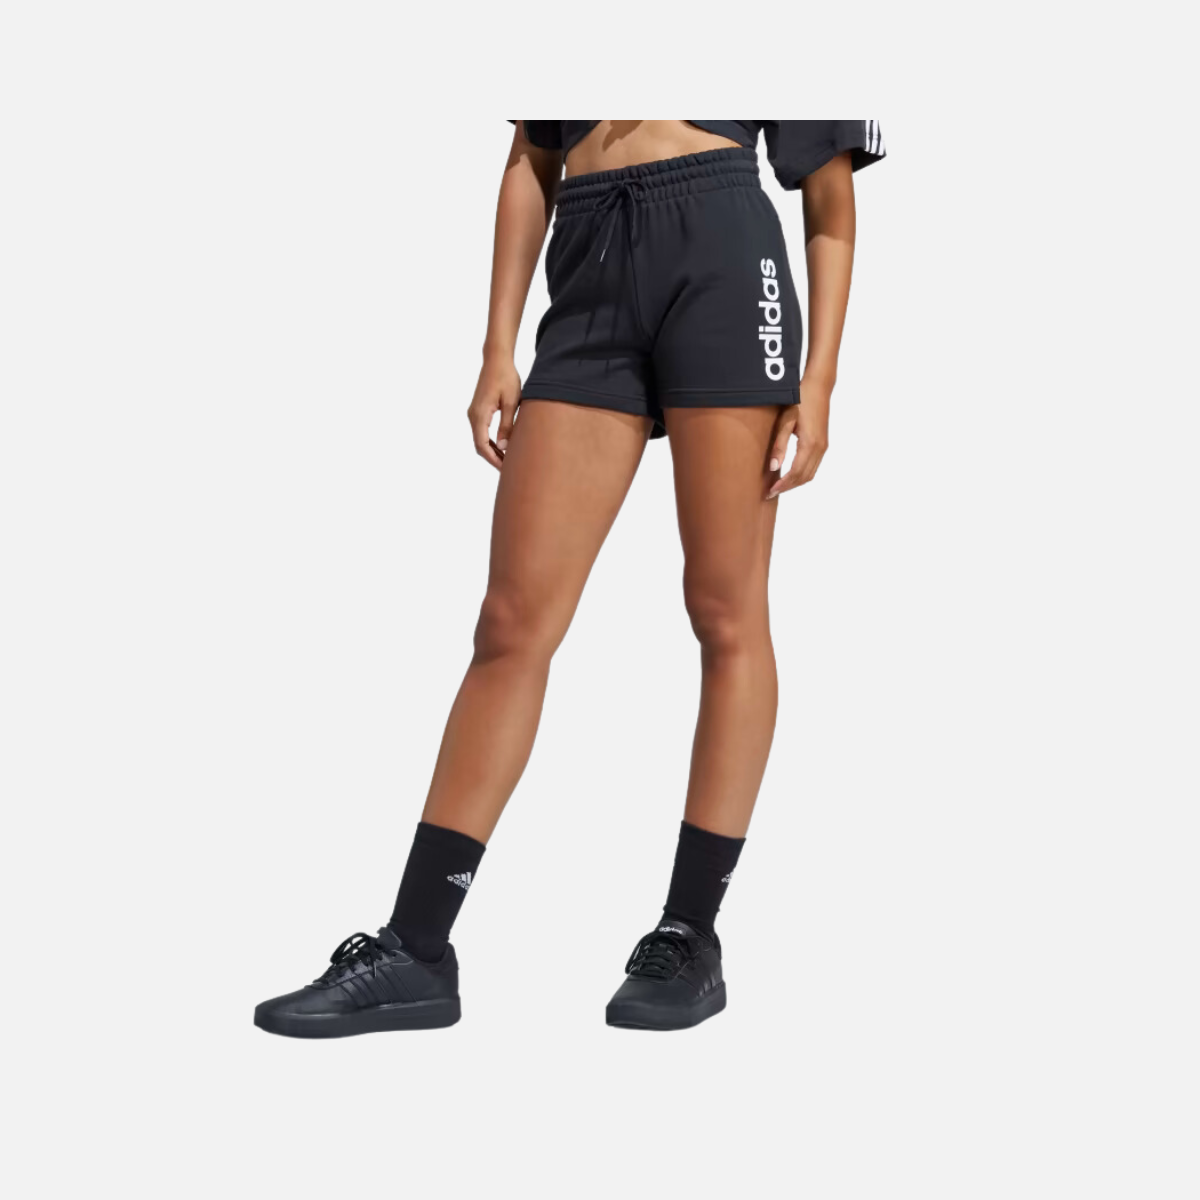 Adidas Essentials Linear French Terry Women's Shorts -Black/White